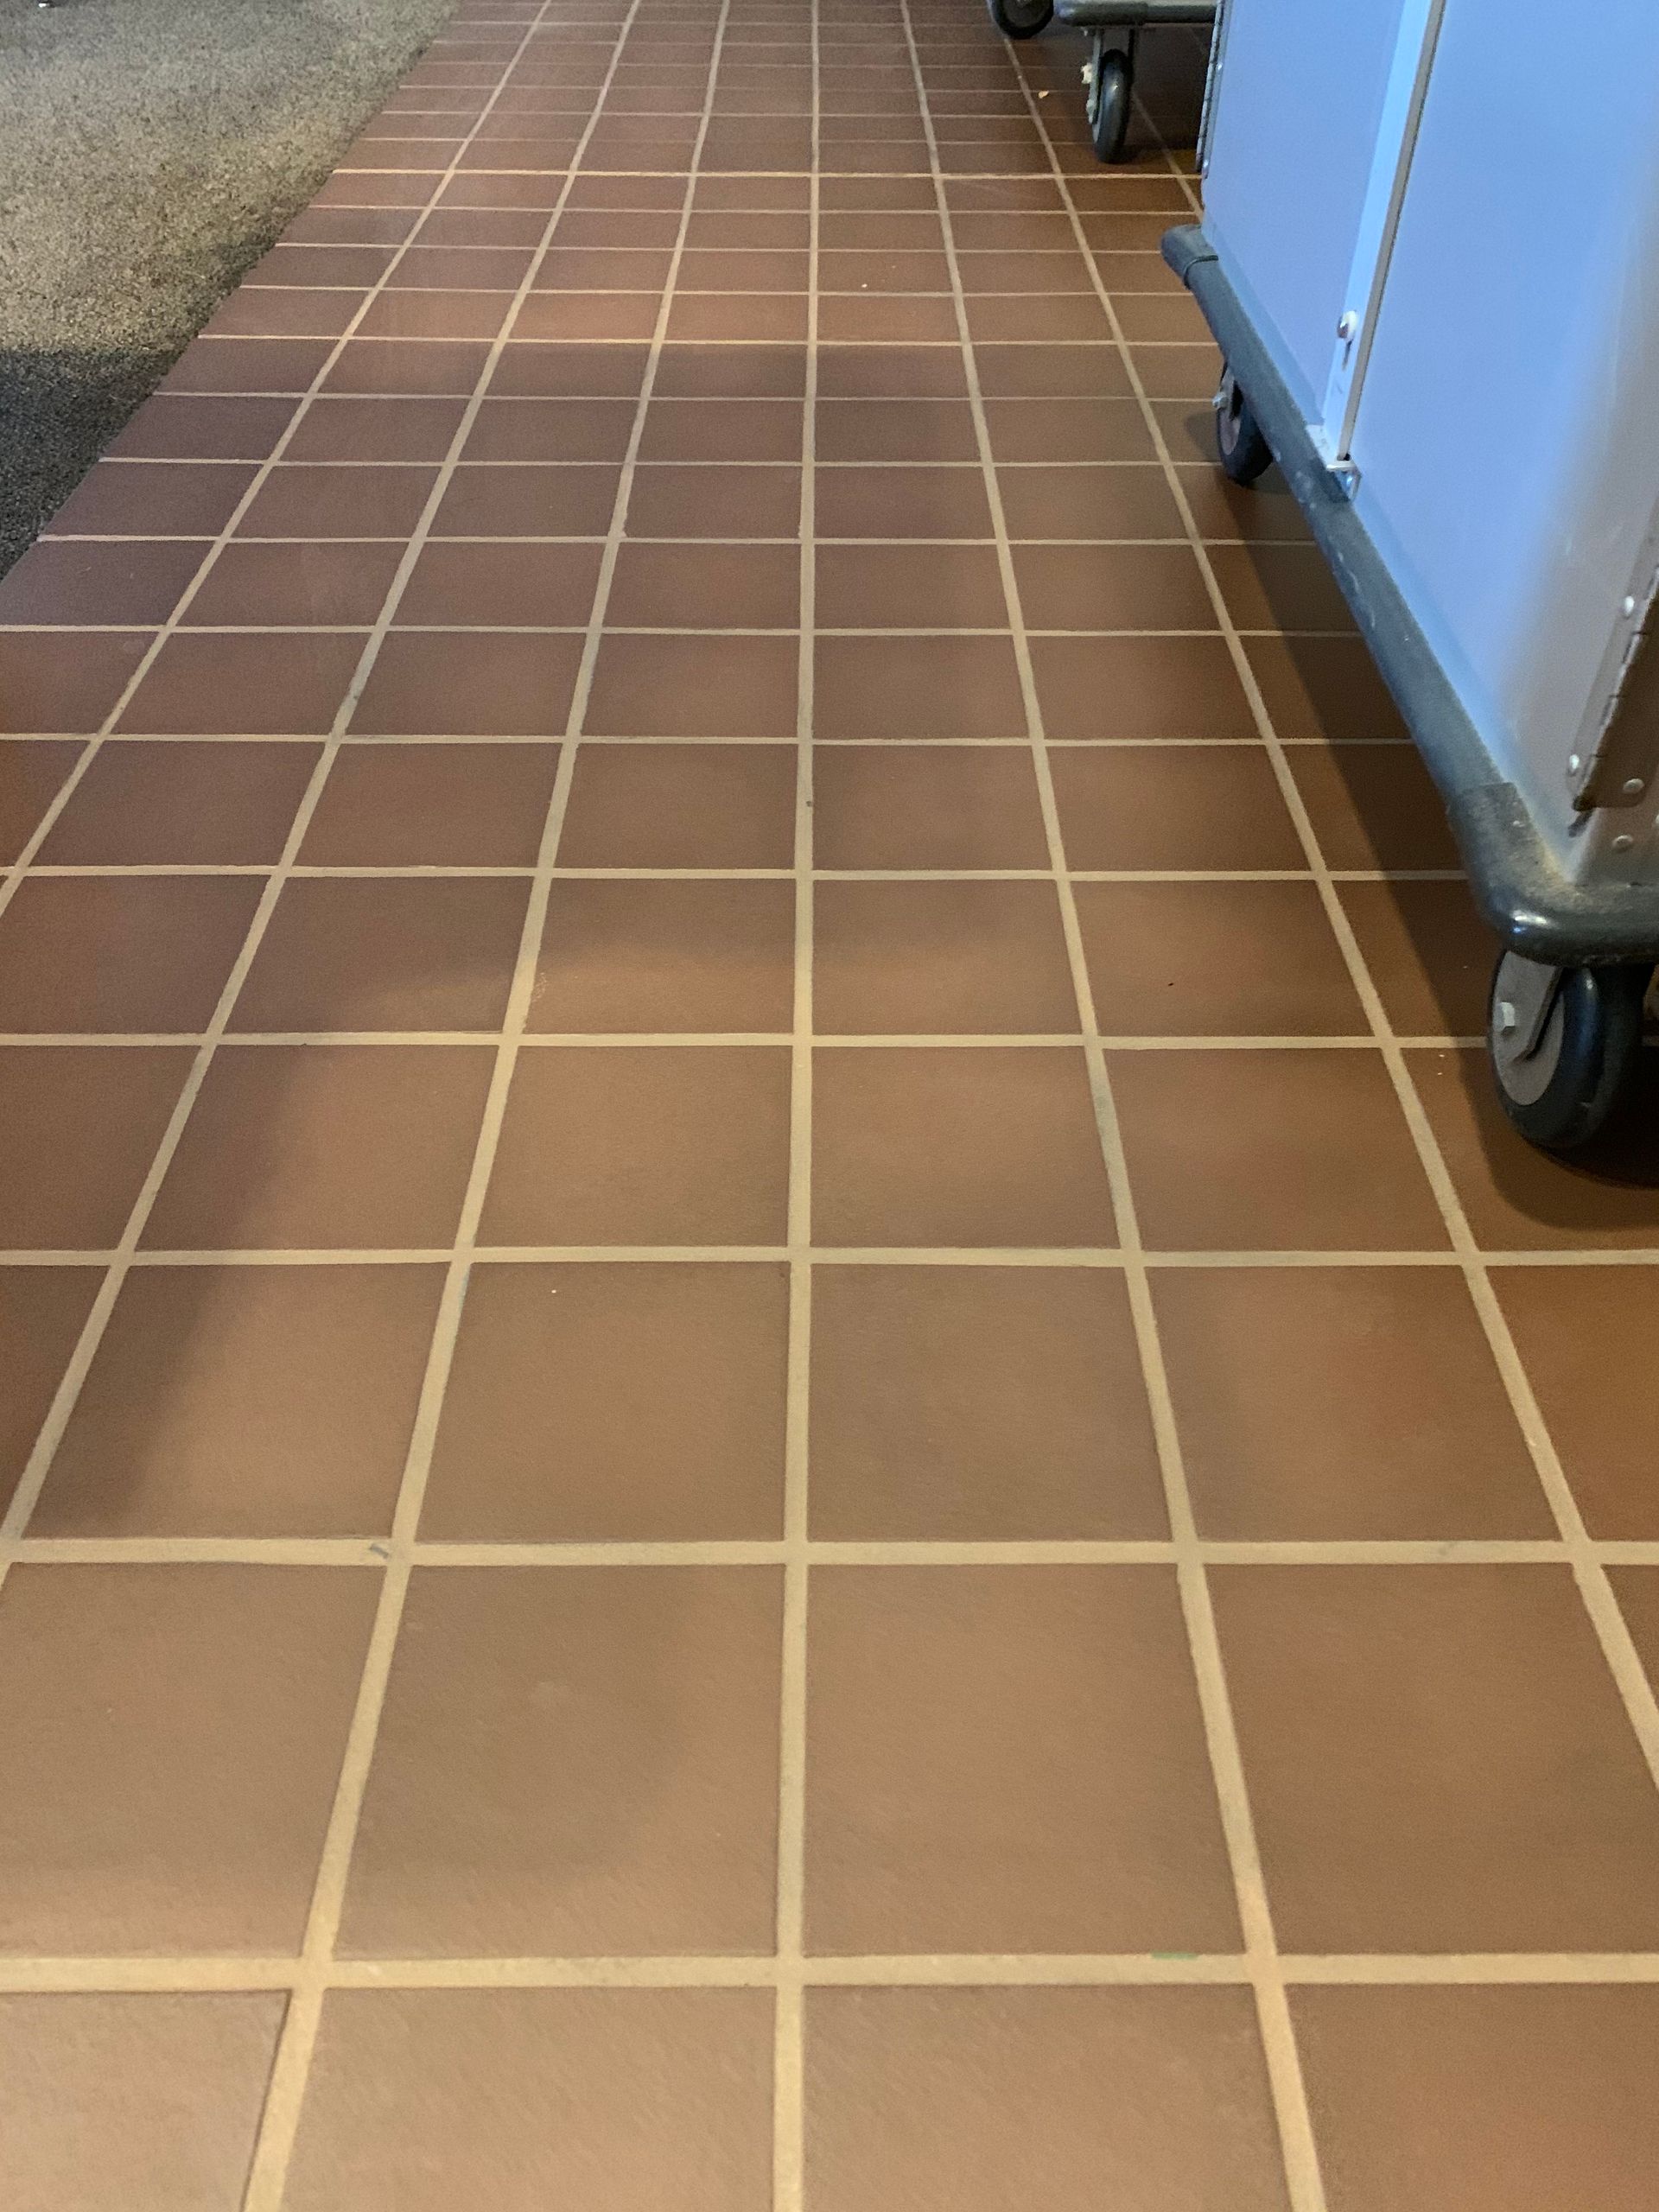 A brown tile floor with white lines and wheels - after